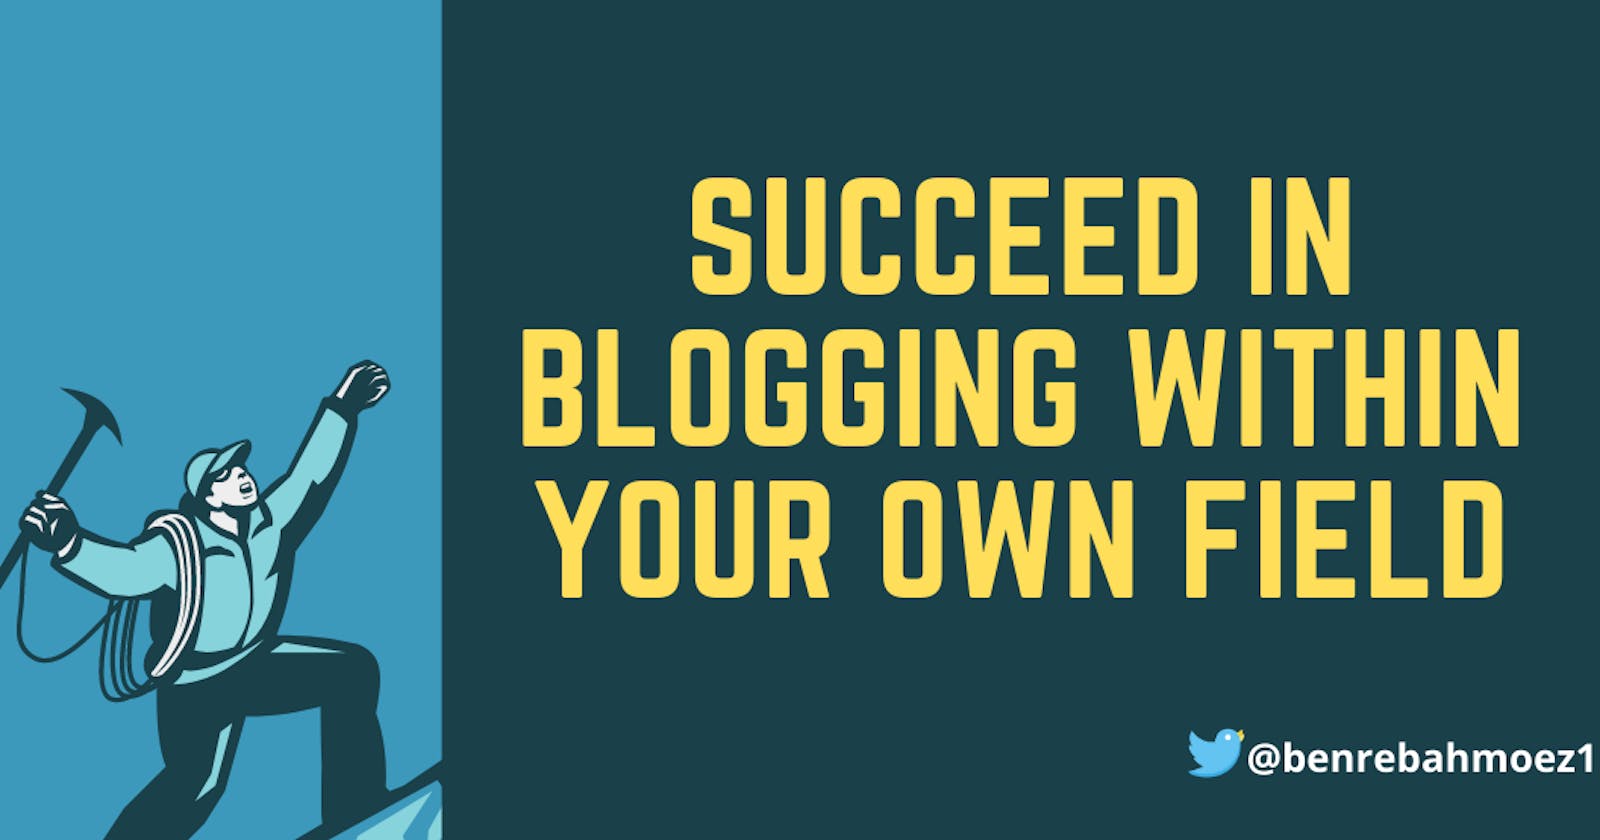 Succeed in blogging within your own field